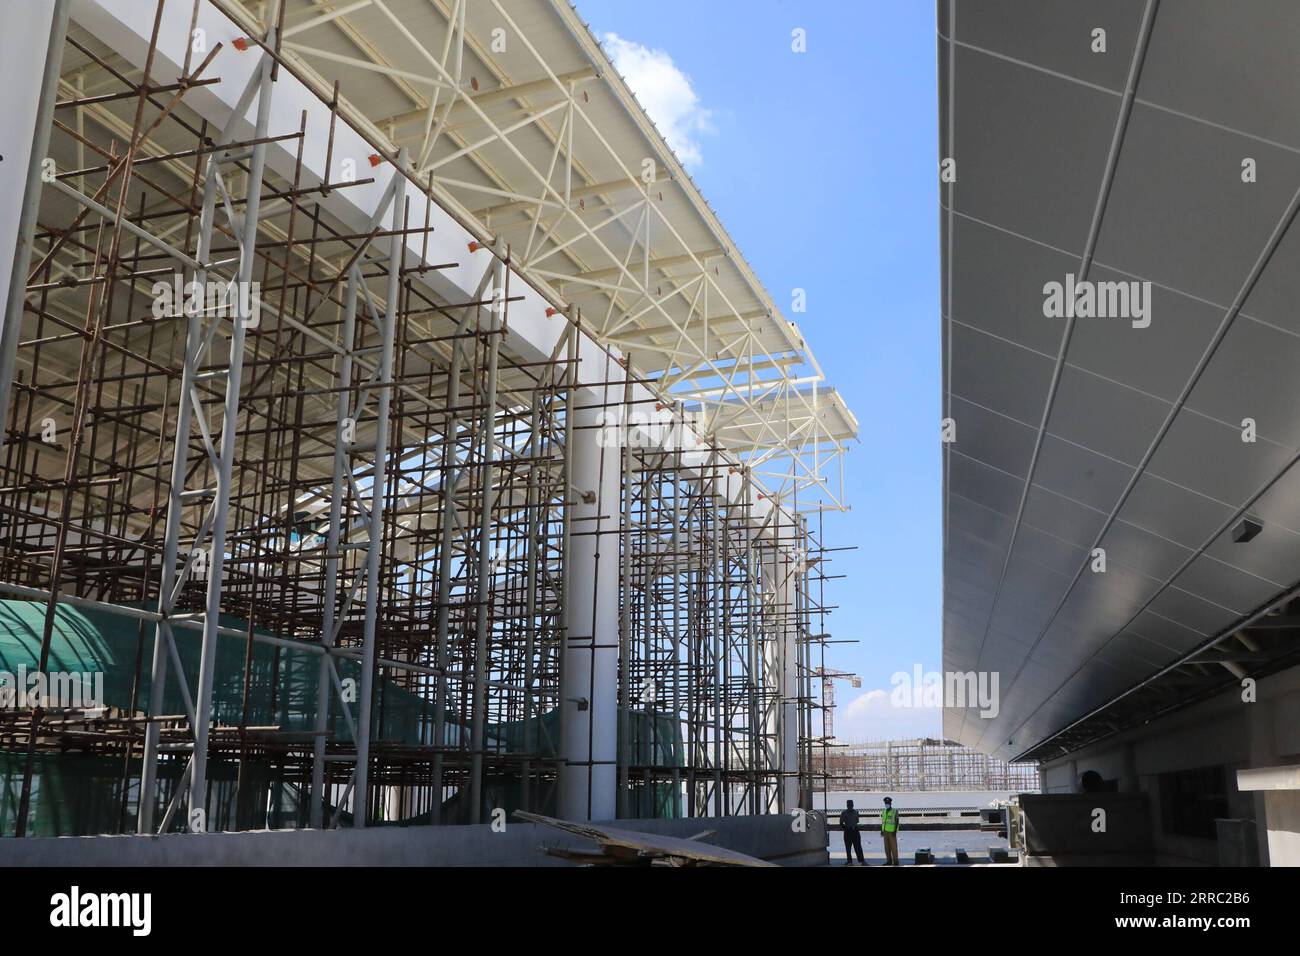 211014 -- HARARE, Oct. 14, 2021 -- Photo taken on Sept. 1, 2021 shows the construction site of the expansion project of Robert Gabriel Mugabe International Airport in Harare, Zimbabwe. Photo by /Xinhua Xinhua Headlines: 1,000 USD per fake news report -- U.S. plot to discredit Chinese investments exposed by Zimbabwean daily Wanda PUBLICATIONxNOTxINxCHN Stock Photo